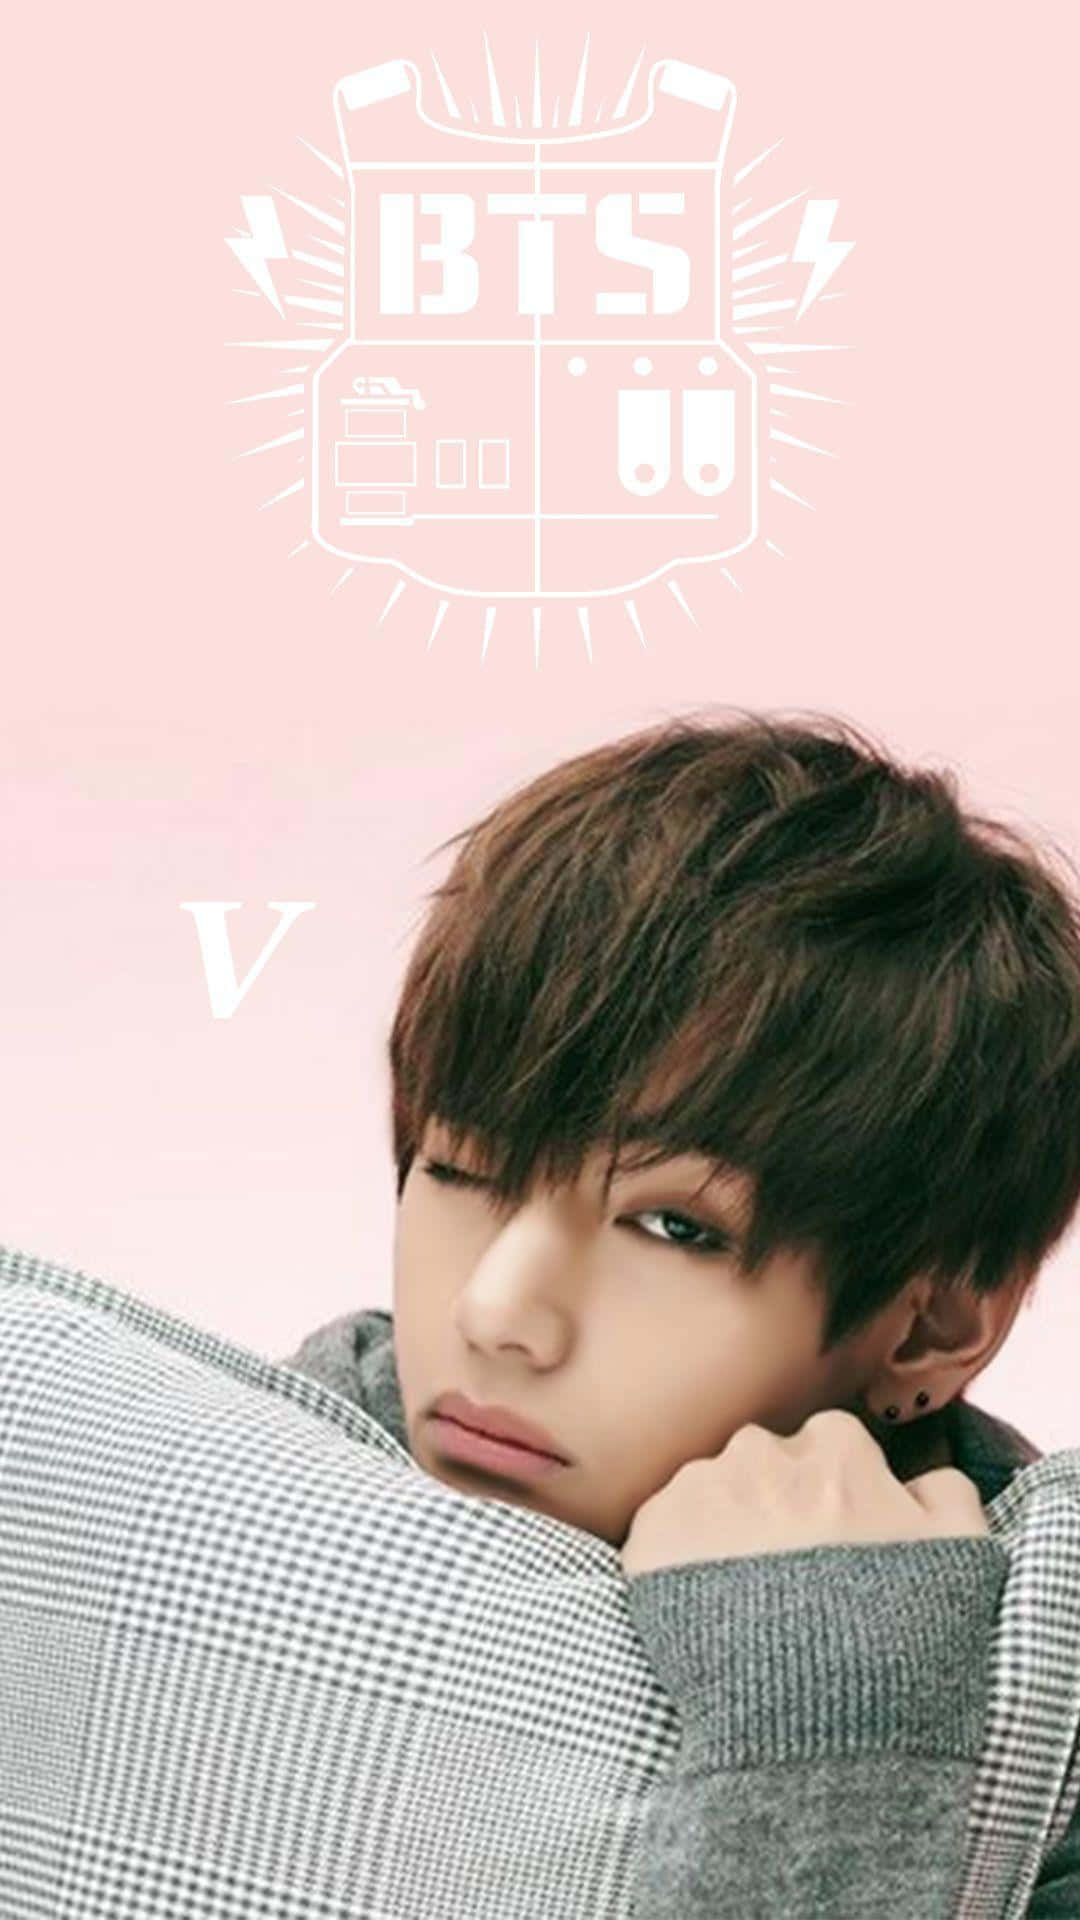 Taehyung Pillow Picture